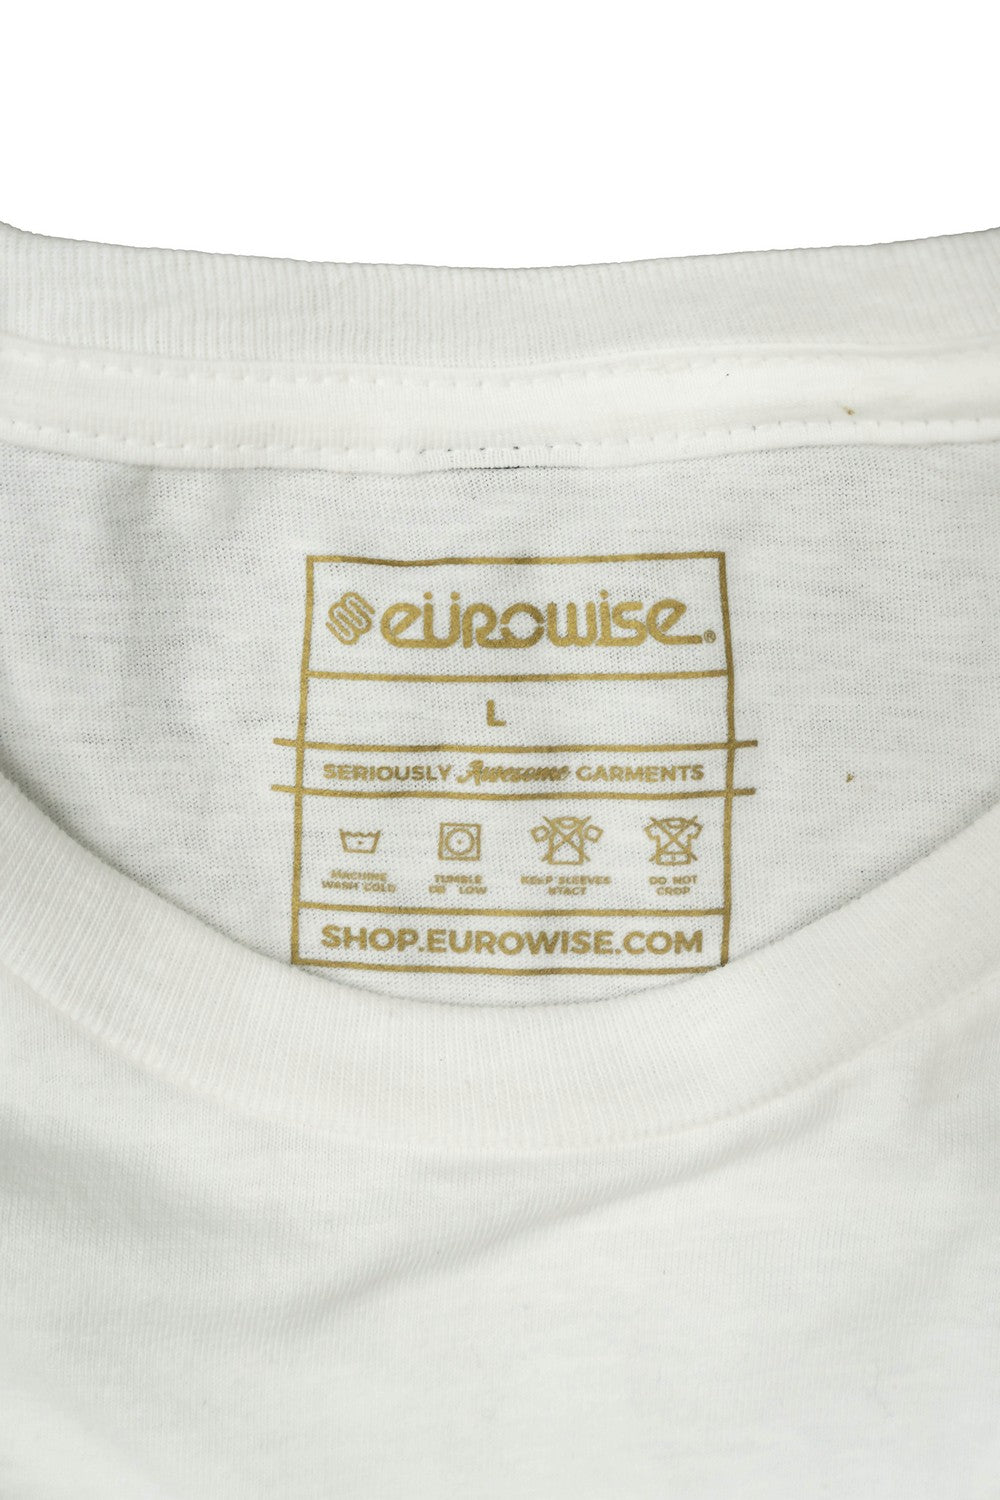 Eurowise Off-Road Gang Shirt: White – Eurowise Performance